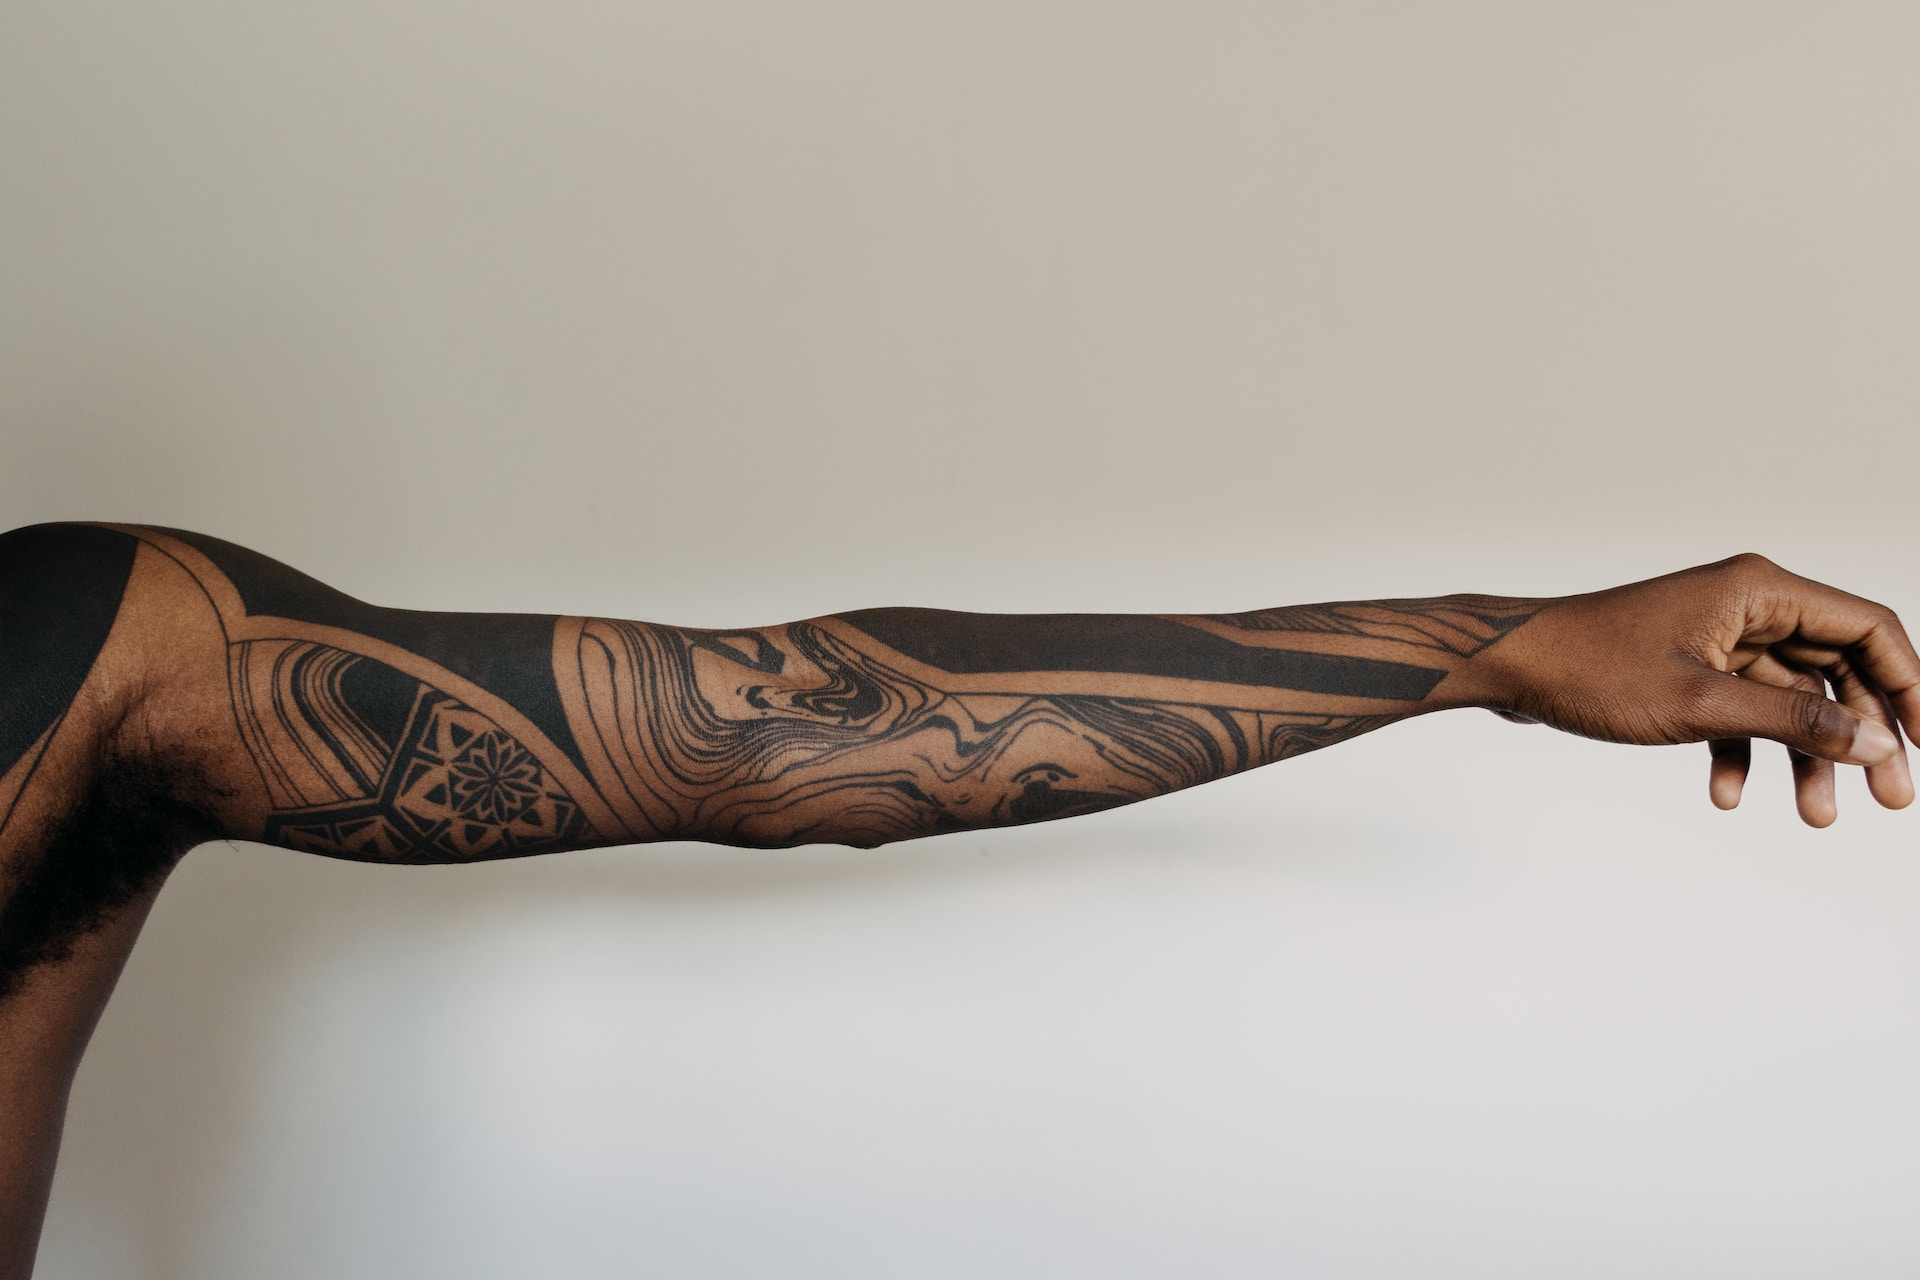 Painless Perfection - The Top Spots for Less Painful Tattoos